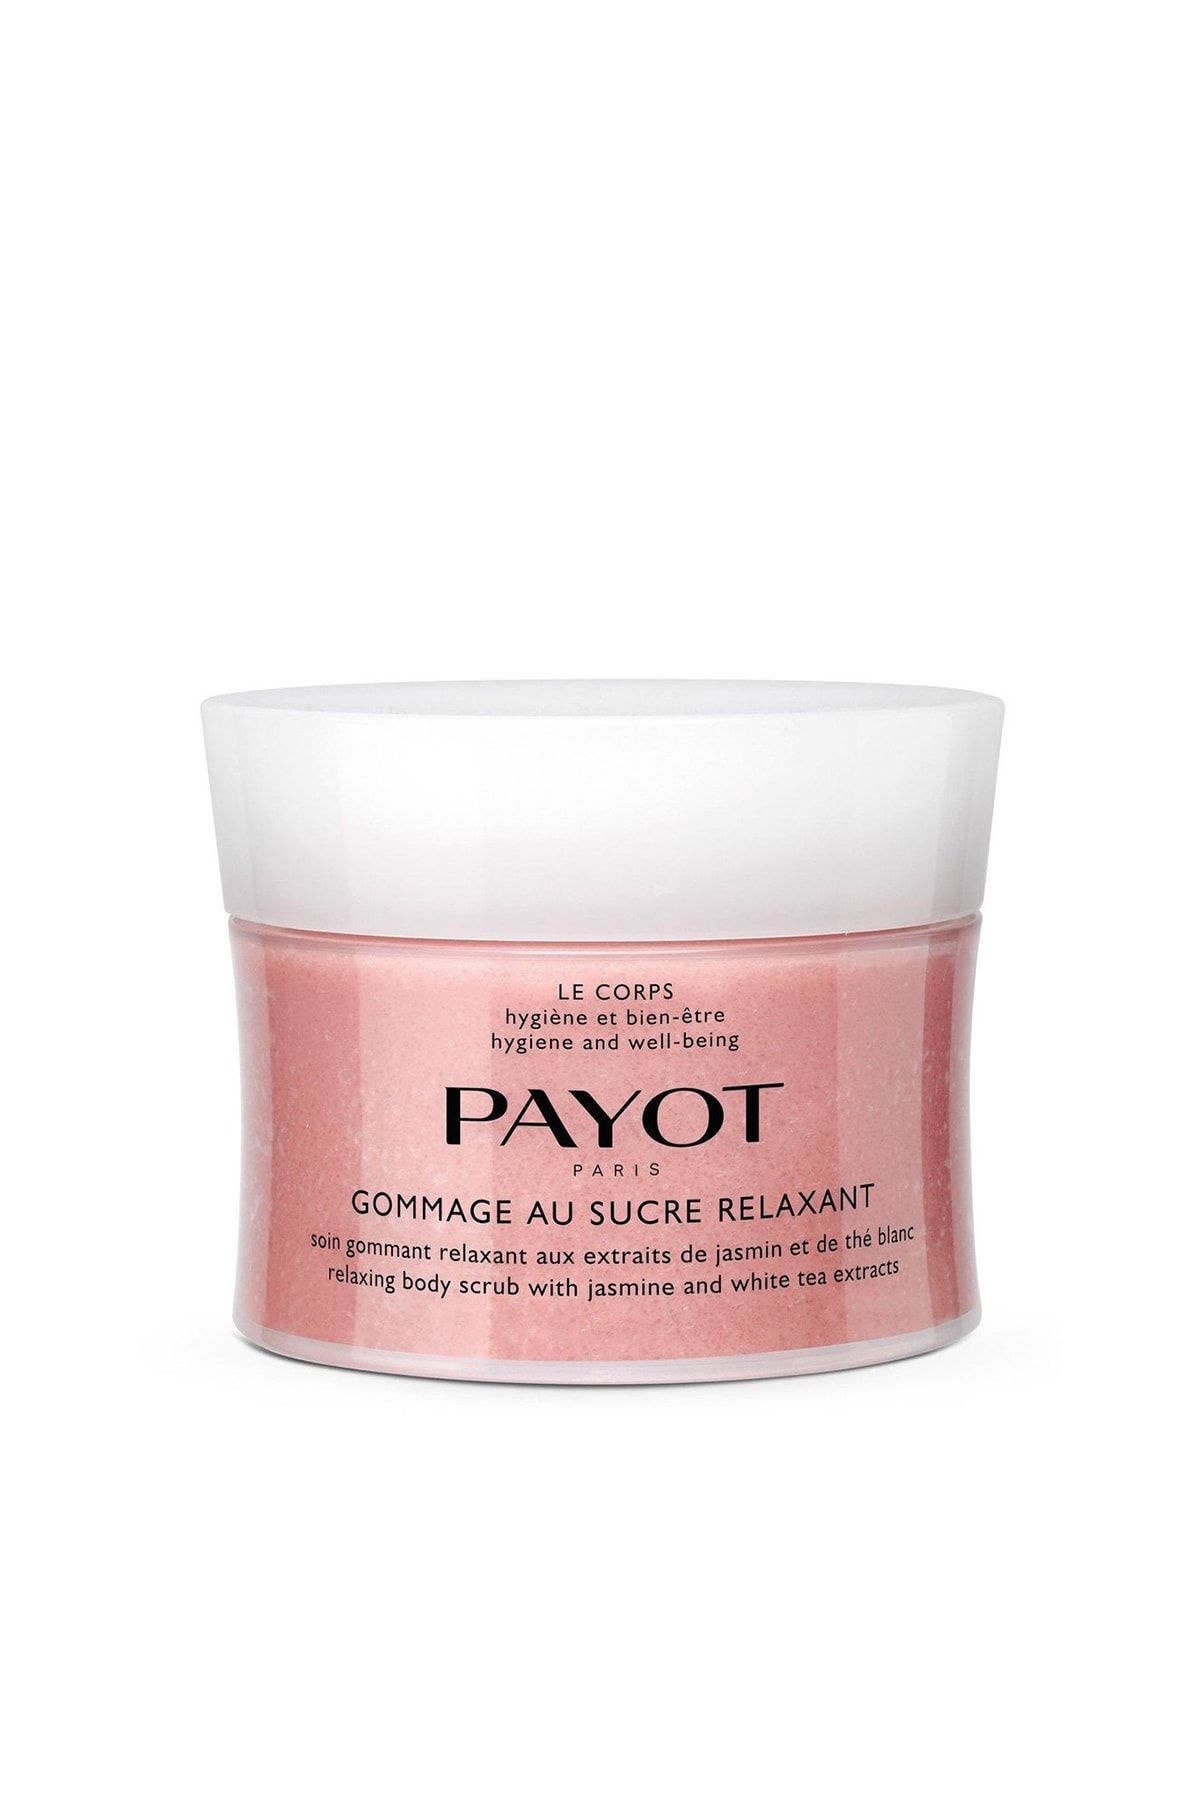 Payot BB Krem - Gommage au Sucre Relaxant 200 ml 3390150558283